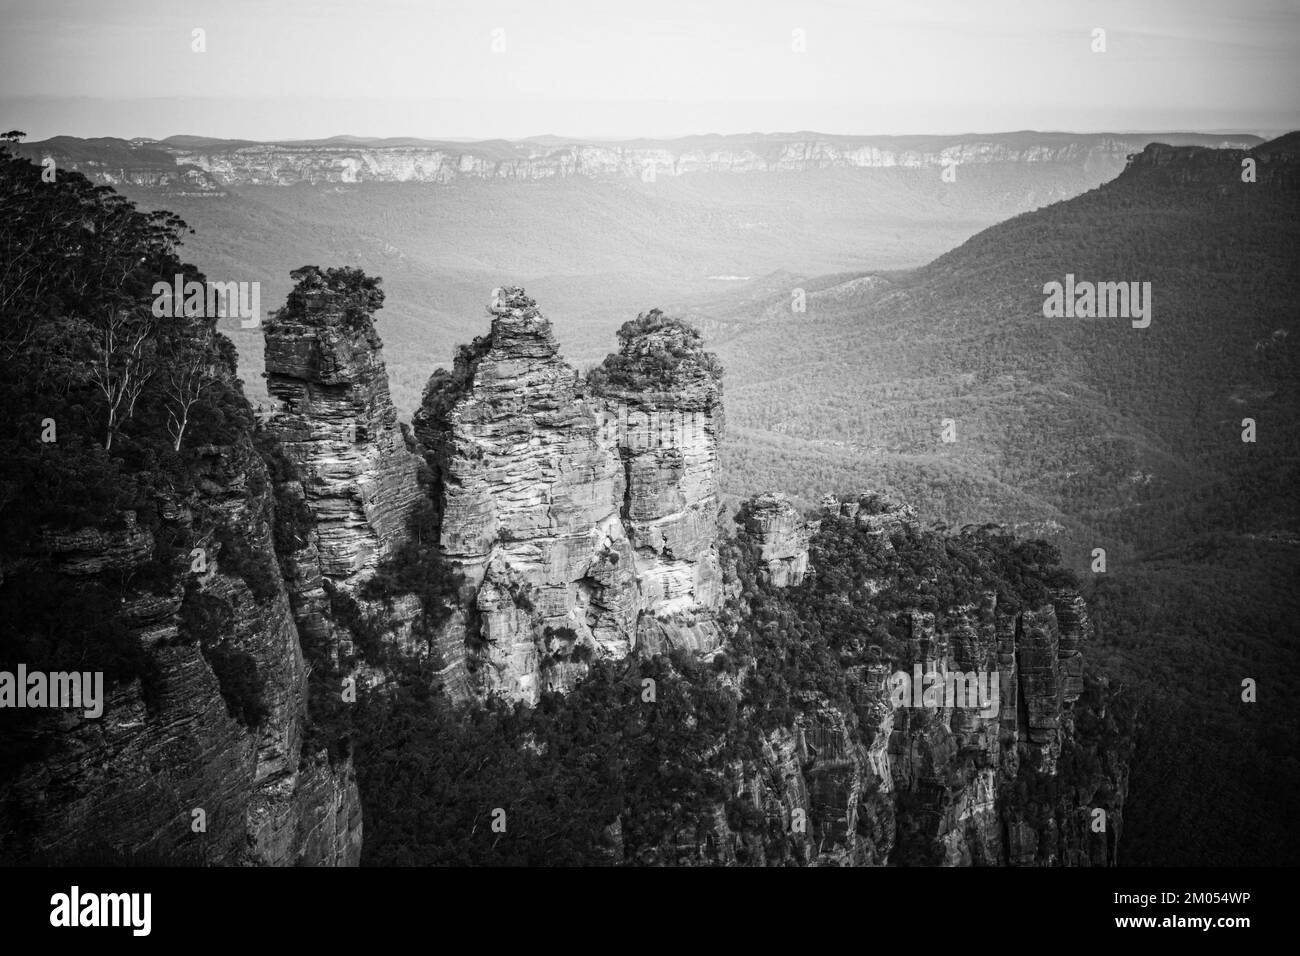 The Three Sisters rock formation in Jamison Valley, Australia Stock Photo